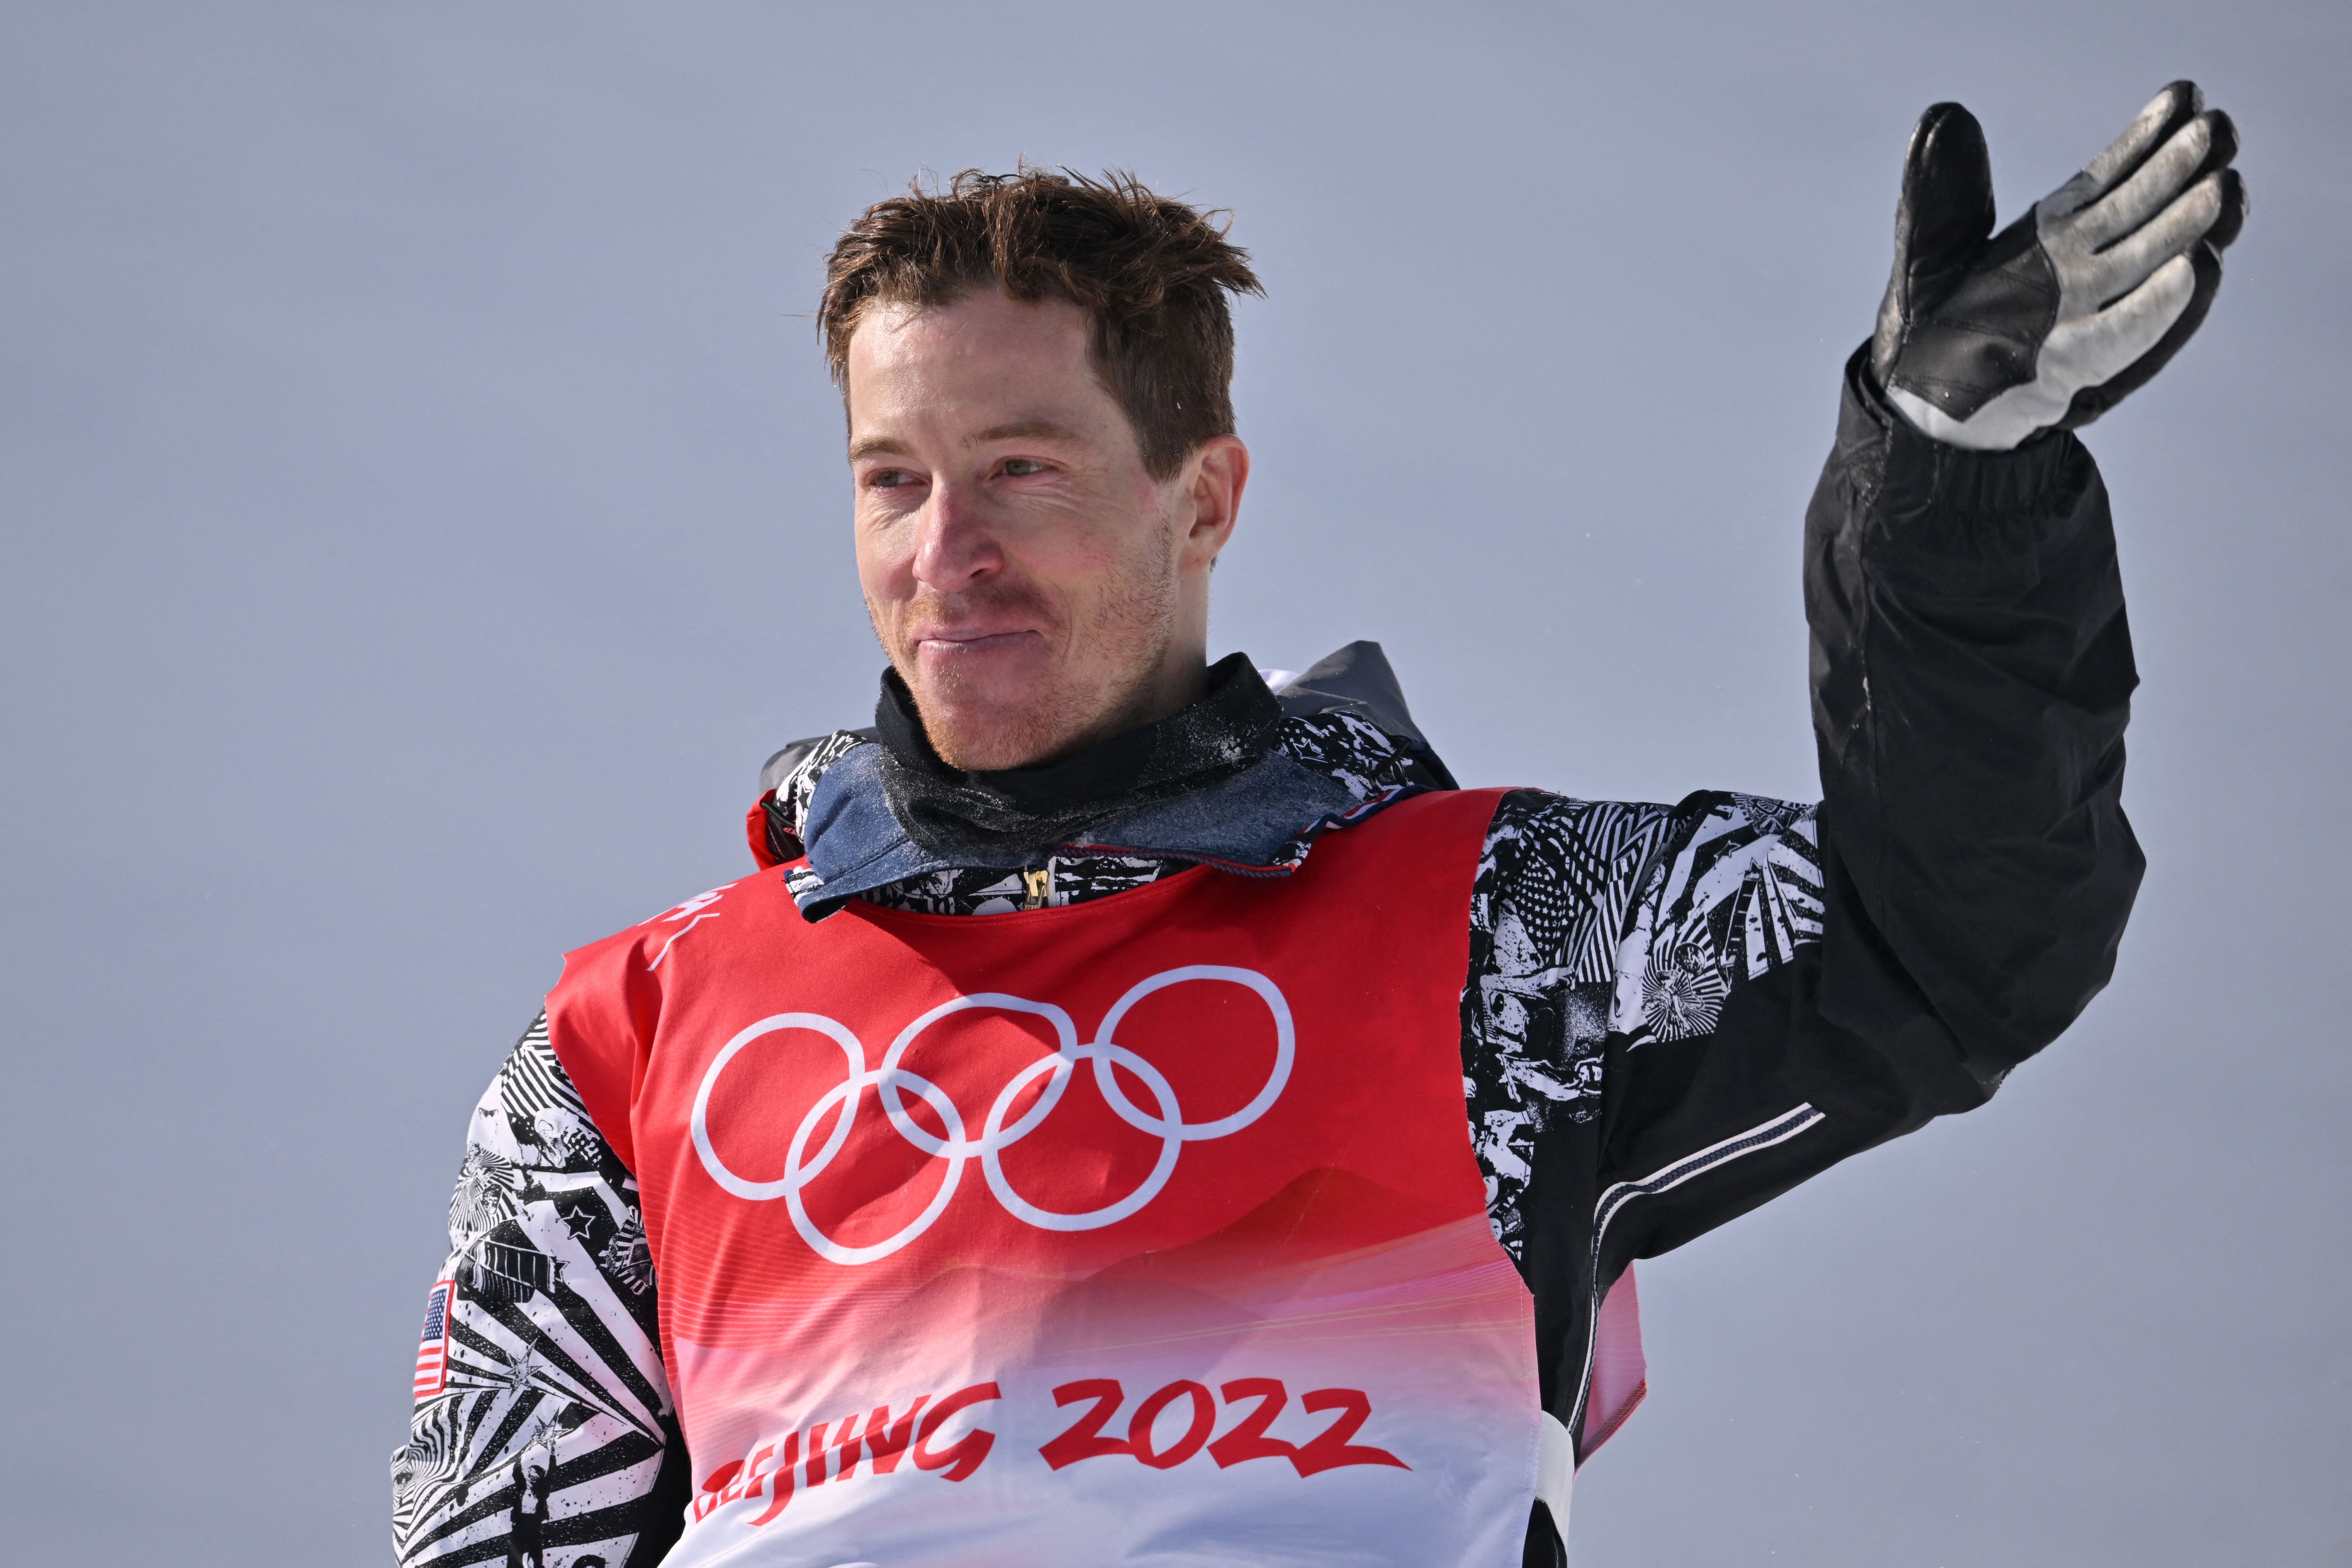 Shaun White Reflects on Olympic Career as He Prepares for Final Games